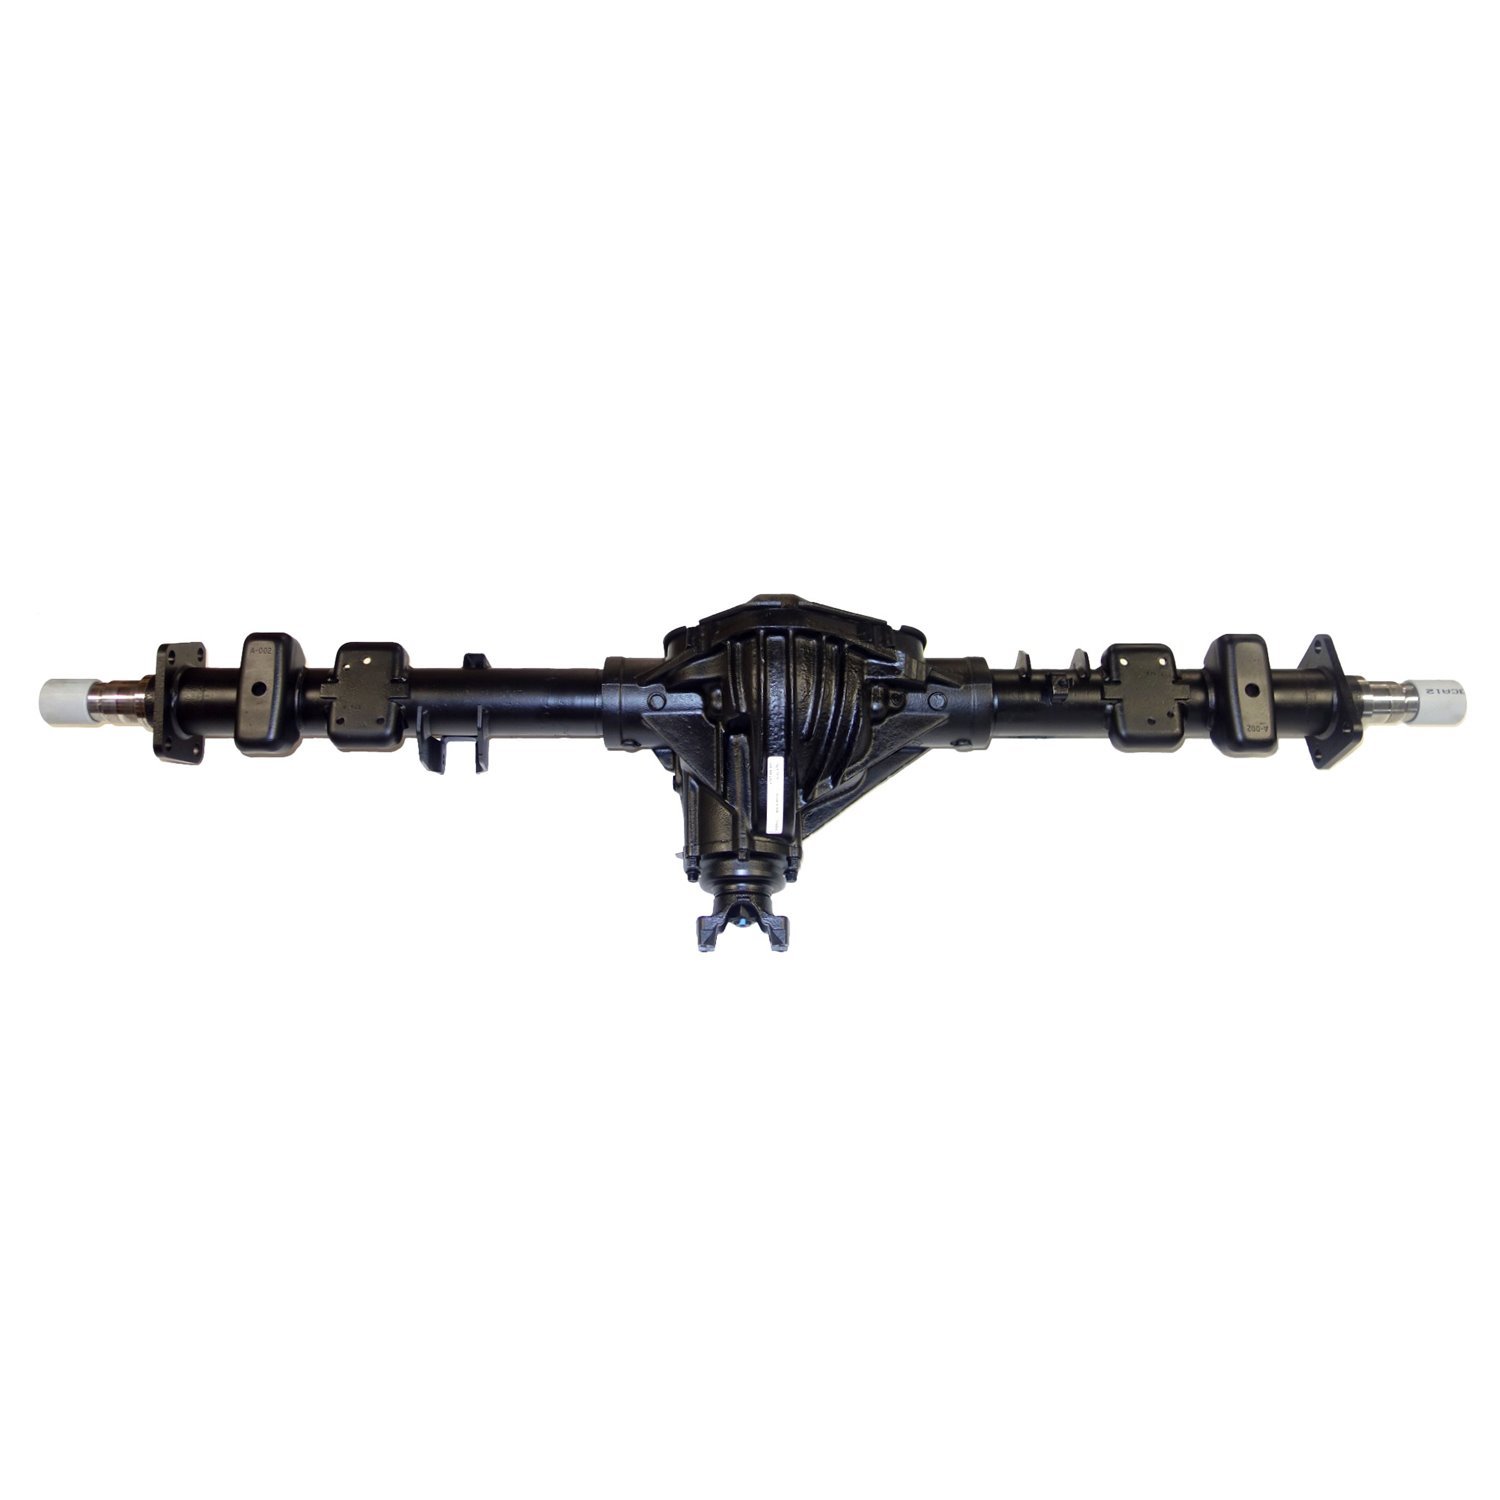 Remanufactured Axle Assy for GM 14 Bolt Truck 90-00 GM 3500, 3.42 , DRW w/o Wide Track